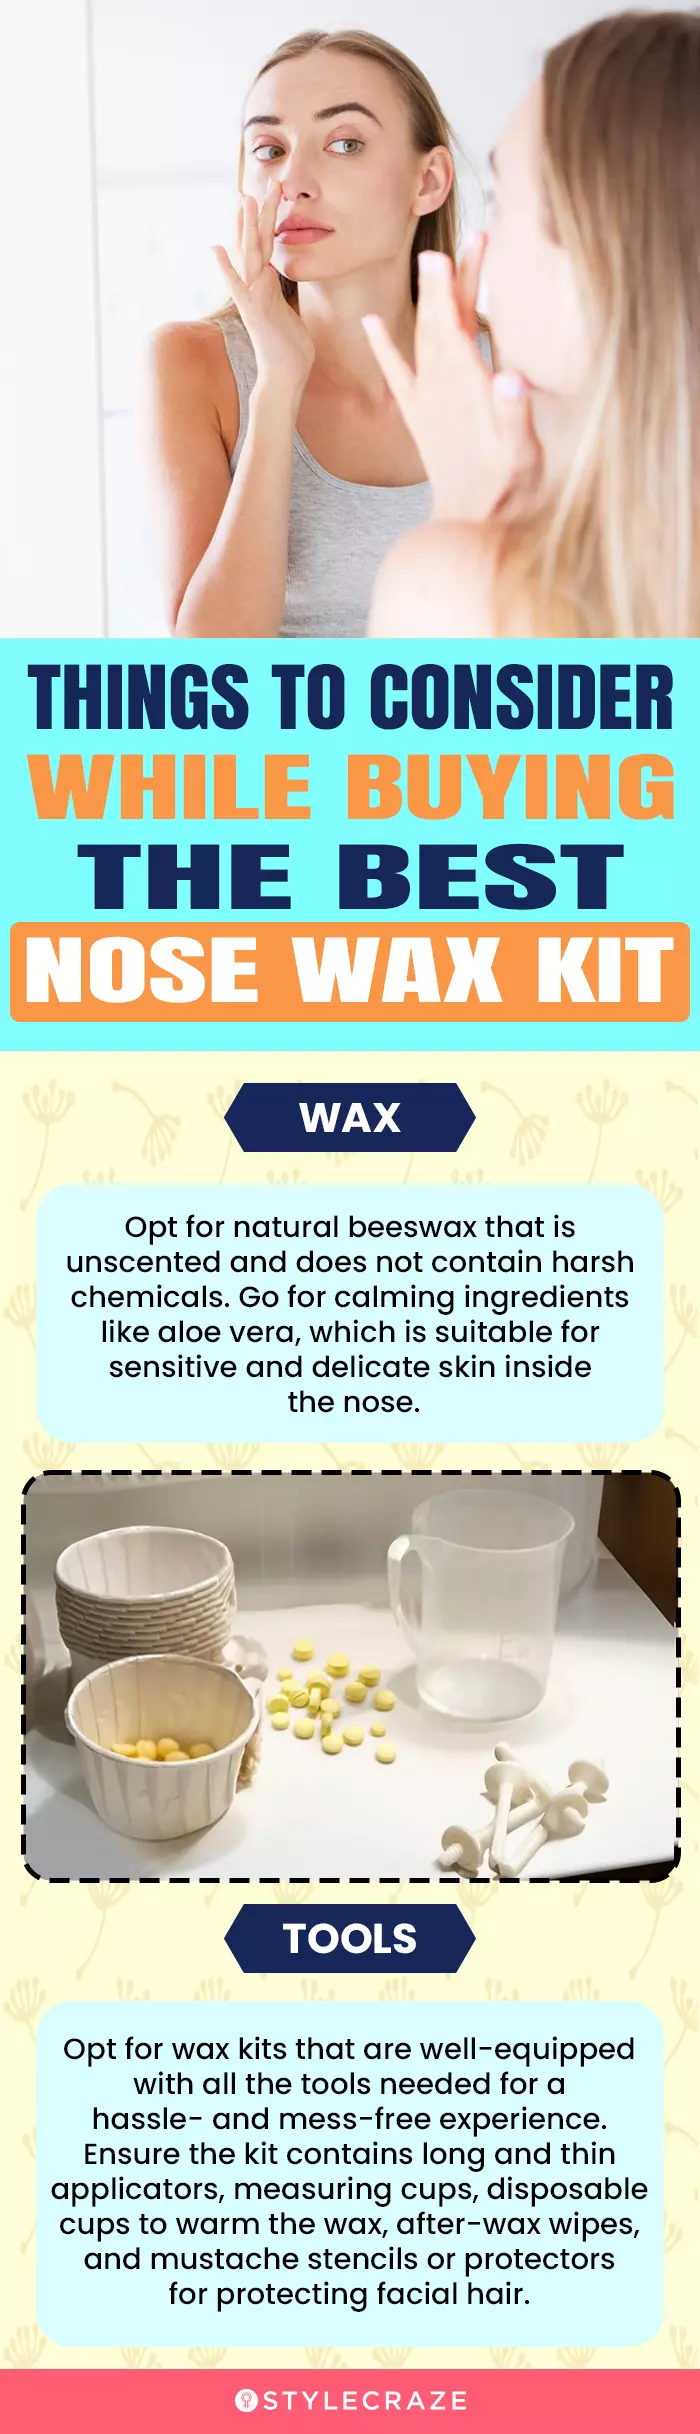 Things To Consider While Buying The Best Nose Wax Kit (infographic)